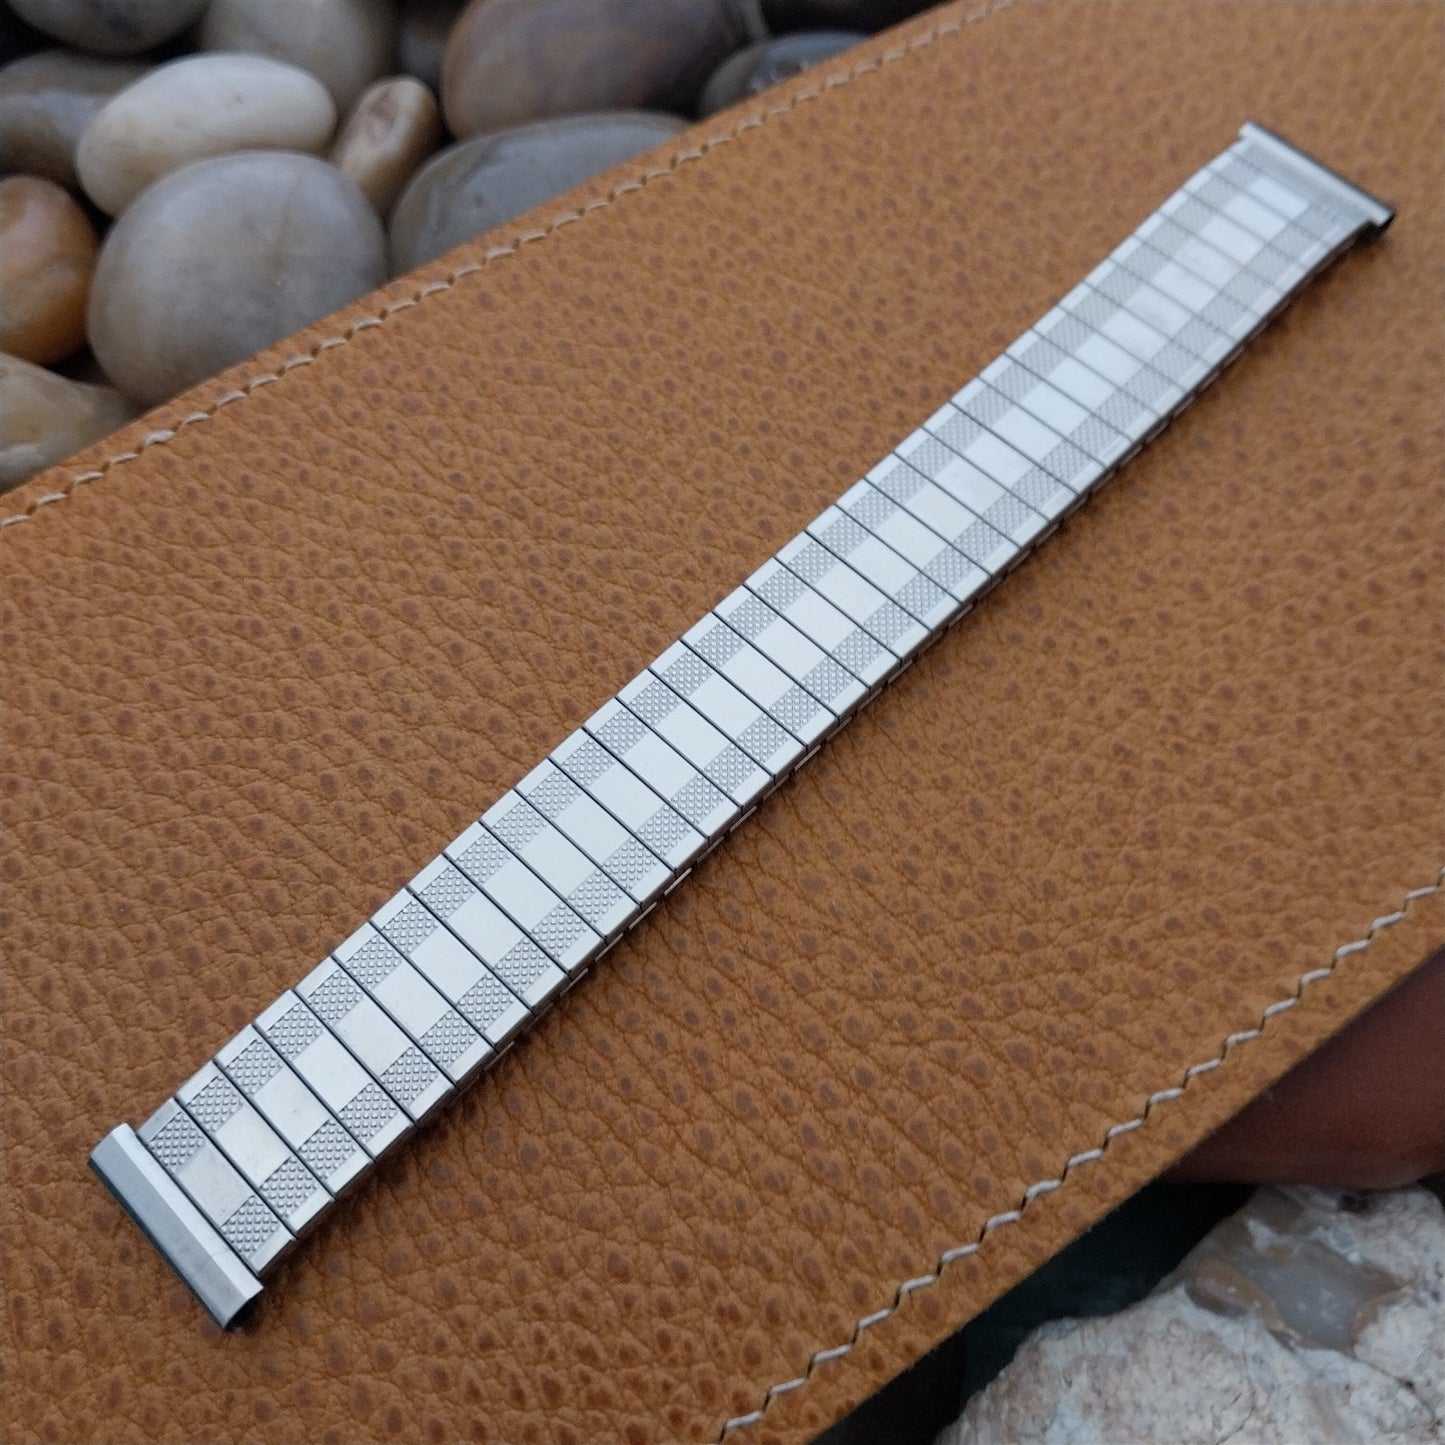 11/16" 17.2mm Flex-Let USA Stainless Steel Expansion nos 60s Vintage Watch Band